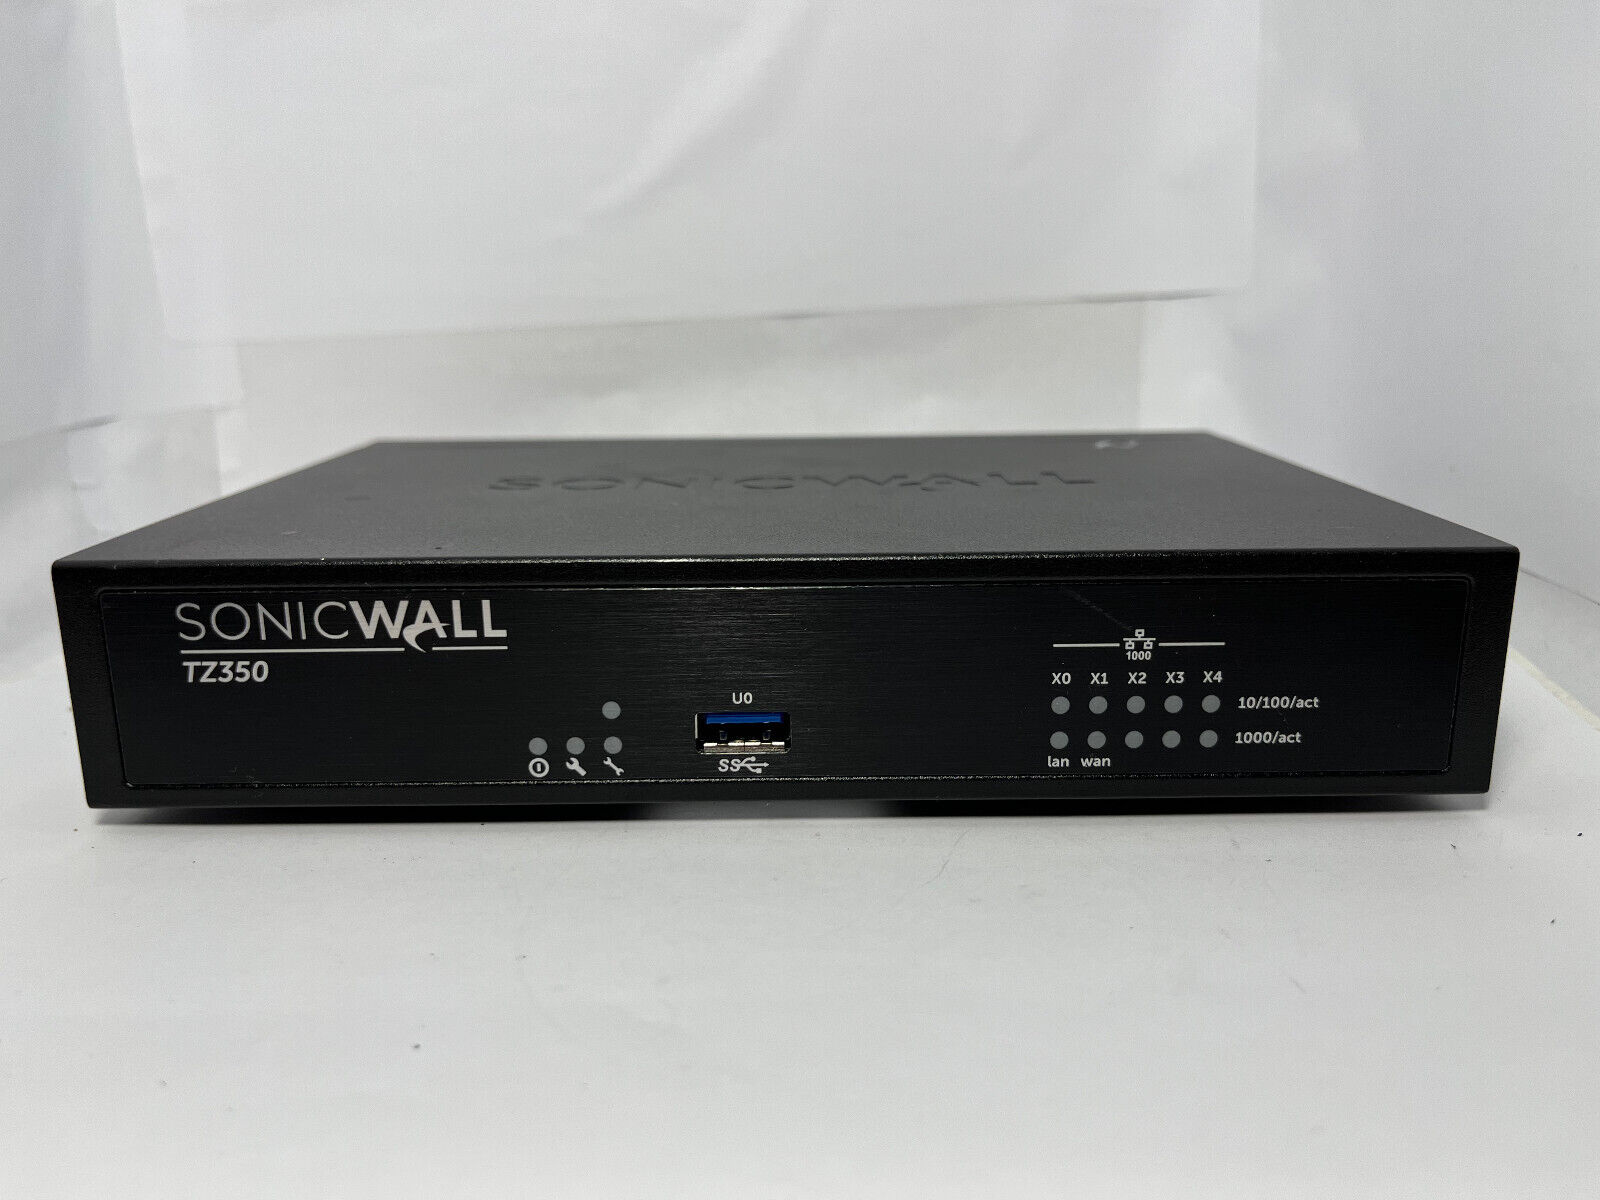 SonicWALL TZ350 Network Security Appliance - Unit Only/ No Power Cable